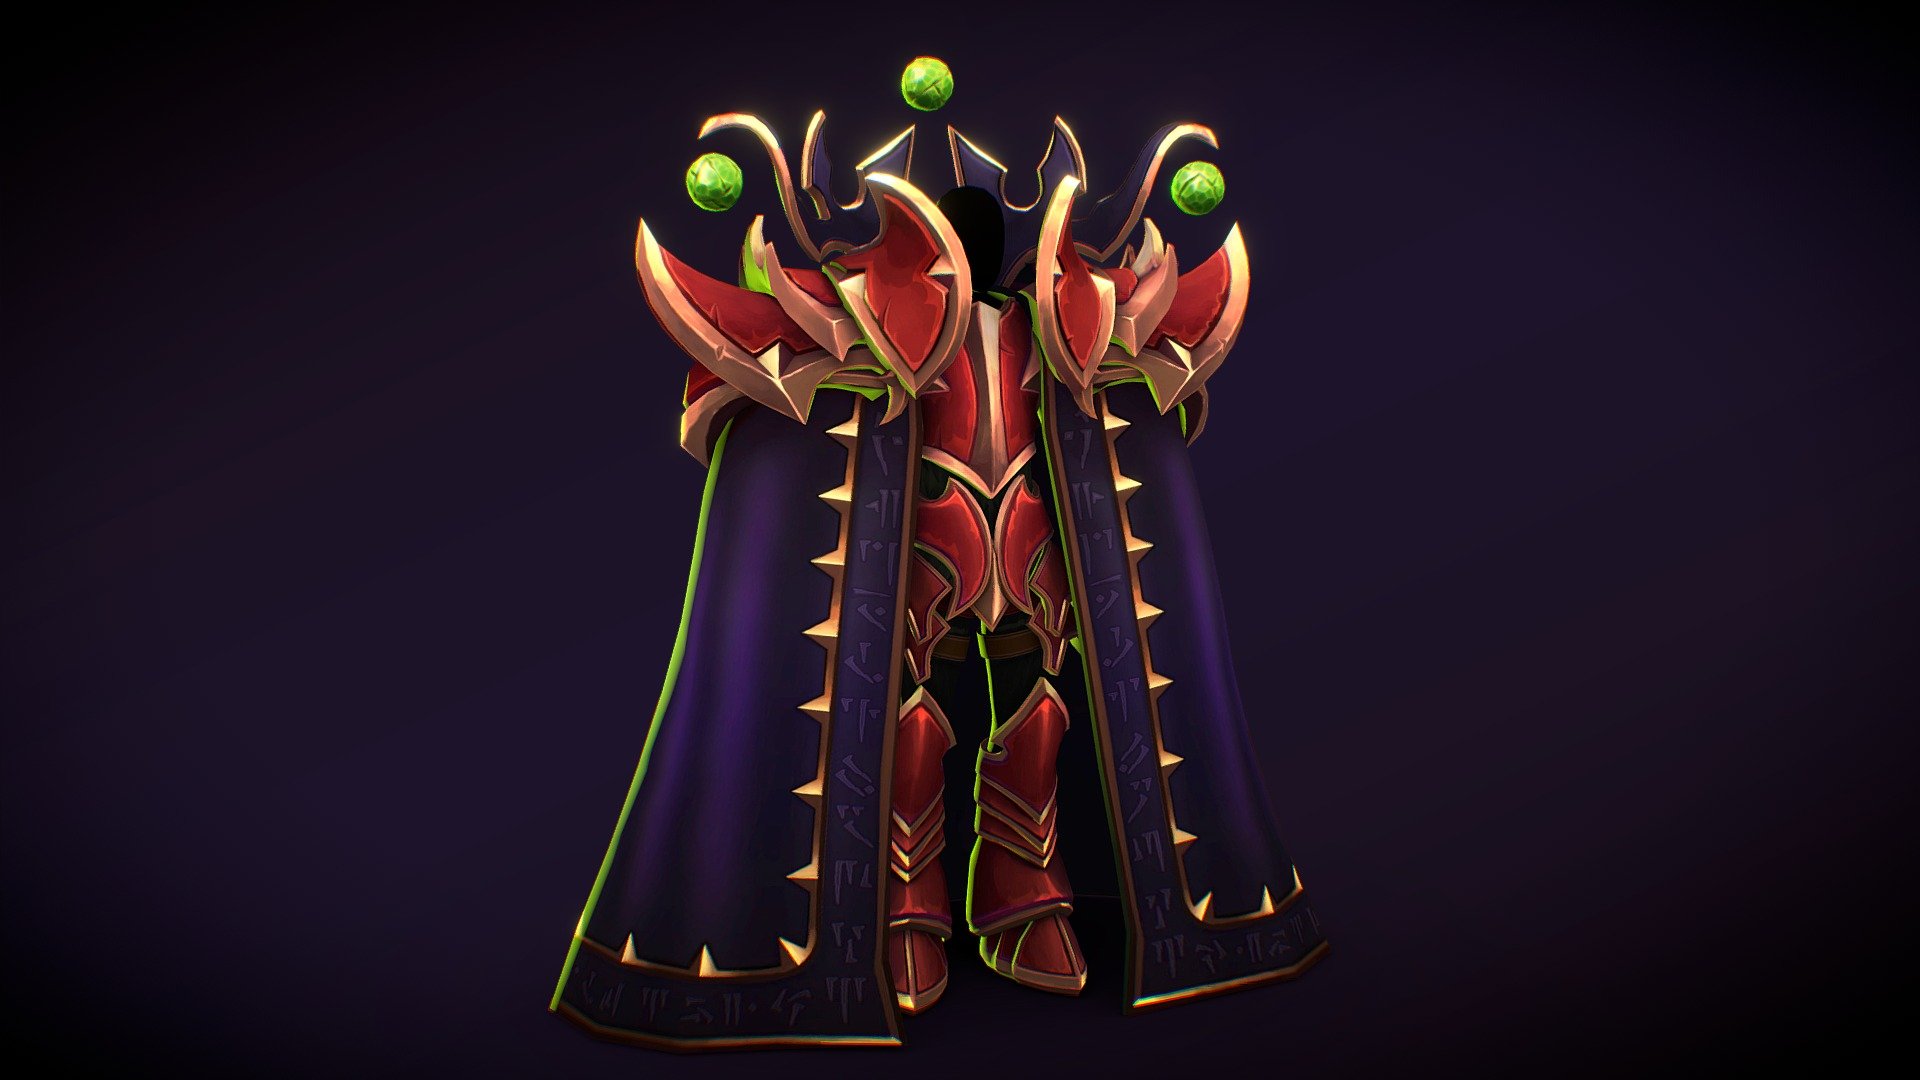 In this study I tried to make an armor based on the character Kael from Wow, it was my first more complex model in handpainted painting, I really liked the process, and I hope you like the result.

Kael'thas &ldquo;Kael